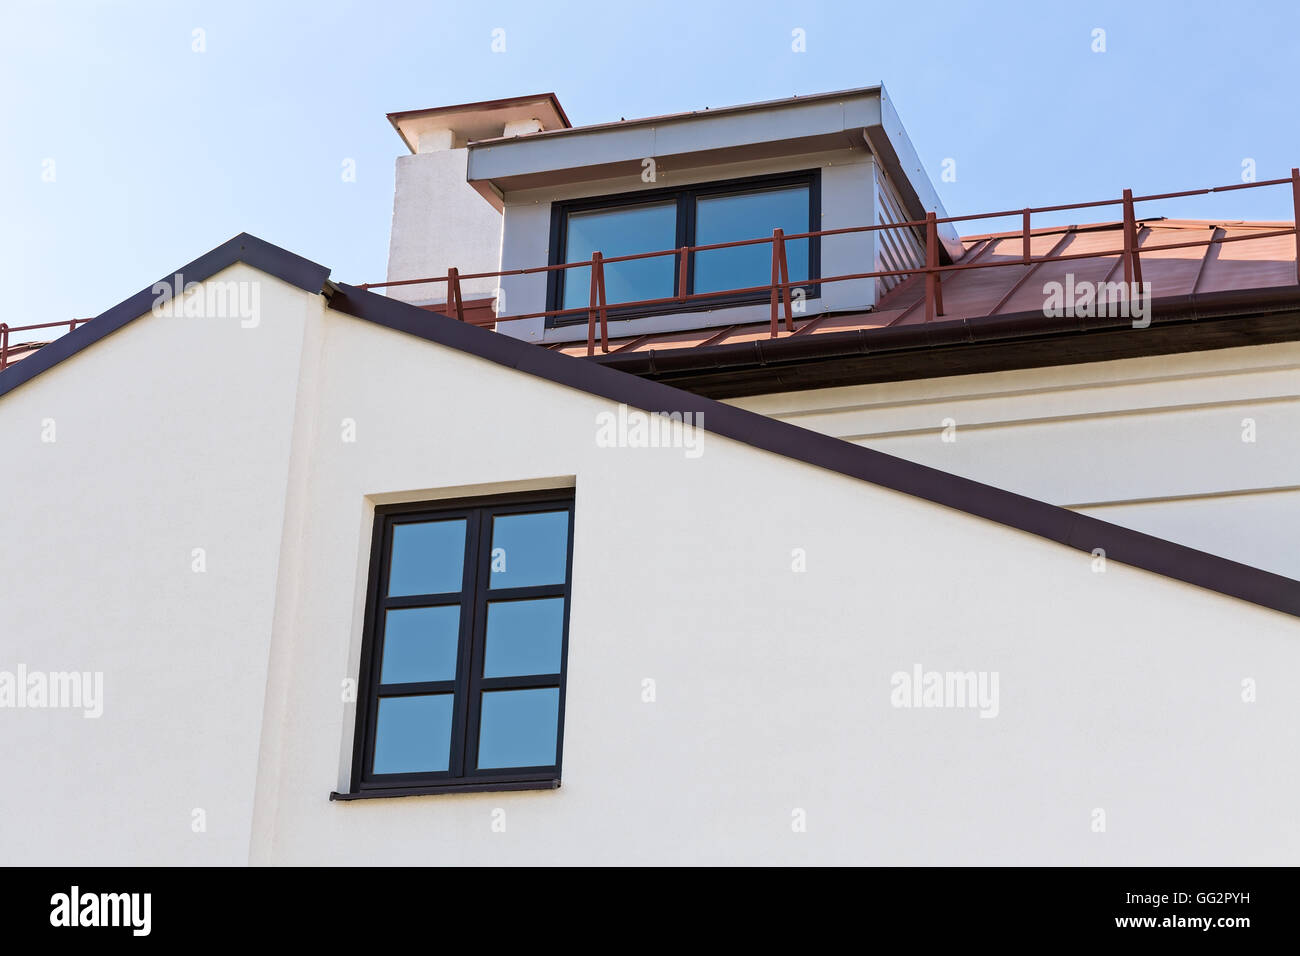 Gable of residential house with dormer window and chimney Stock Photo